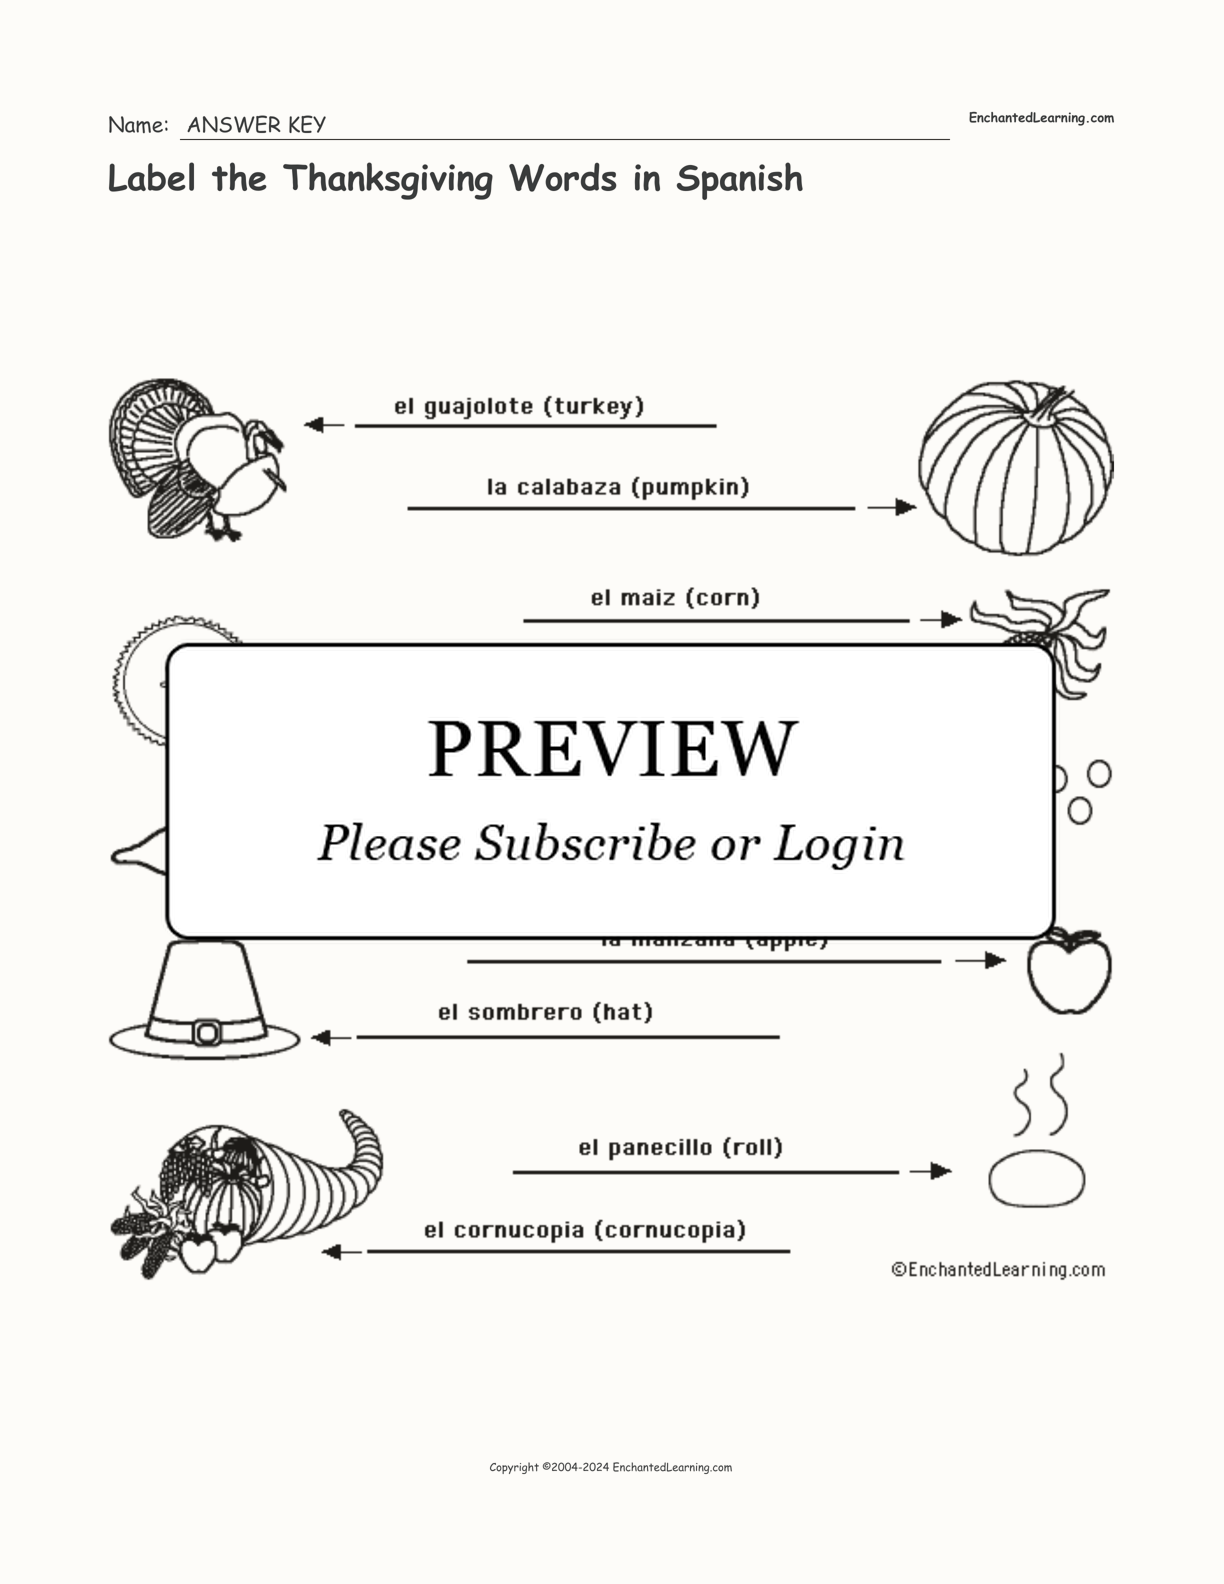 Label the Thanksgiving Words in Spanish interactive worksheet page 2